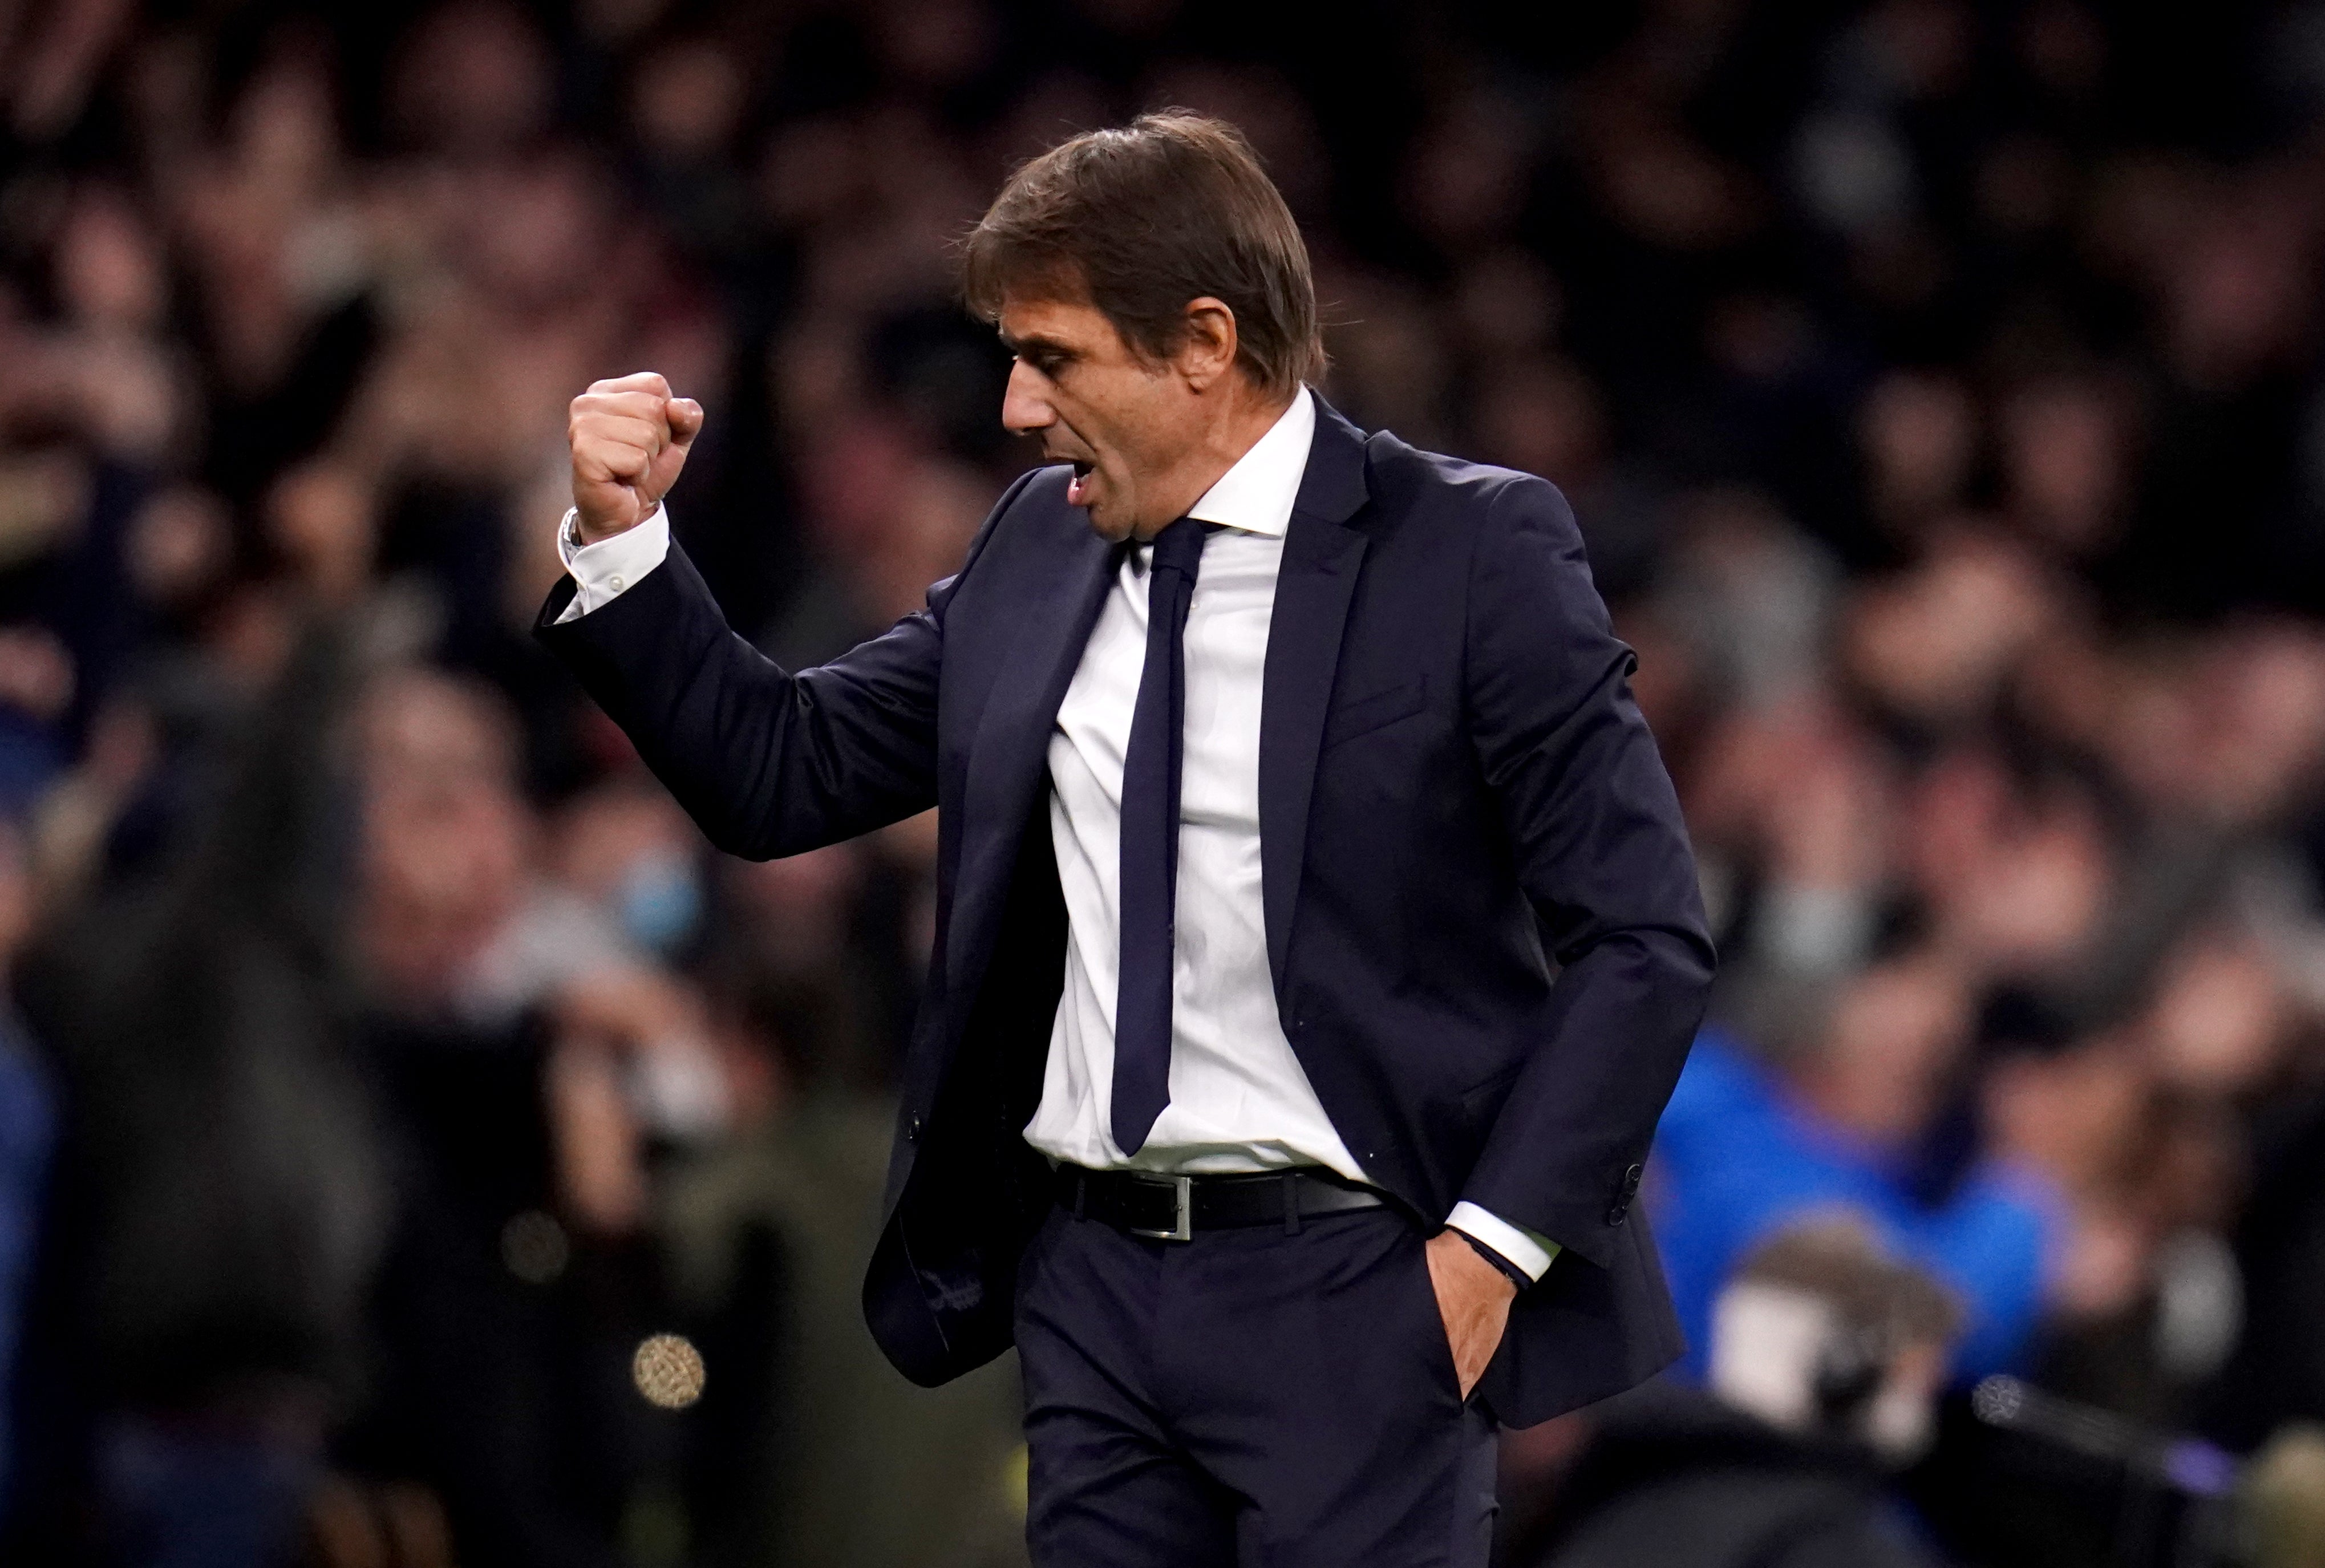 Antonio Conte was never a good fit with Tottenham. Now we know why